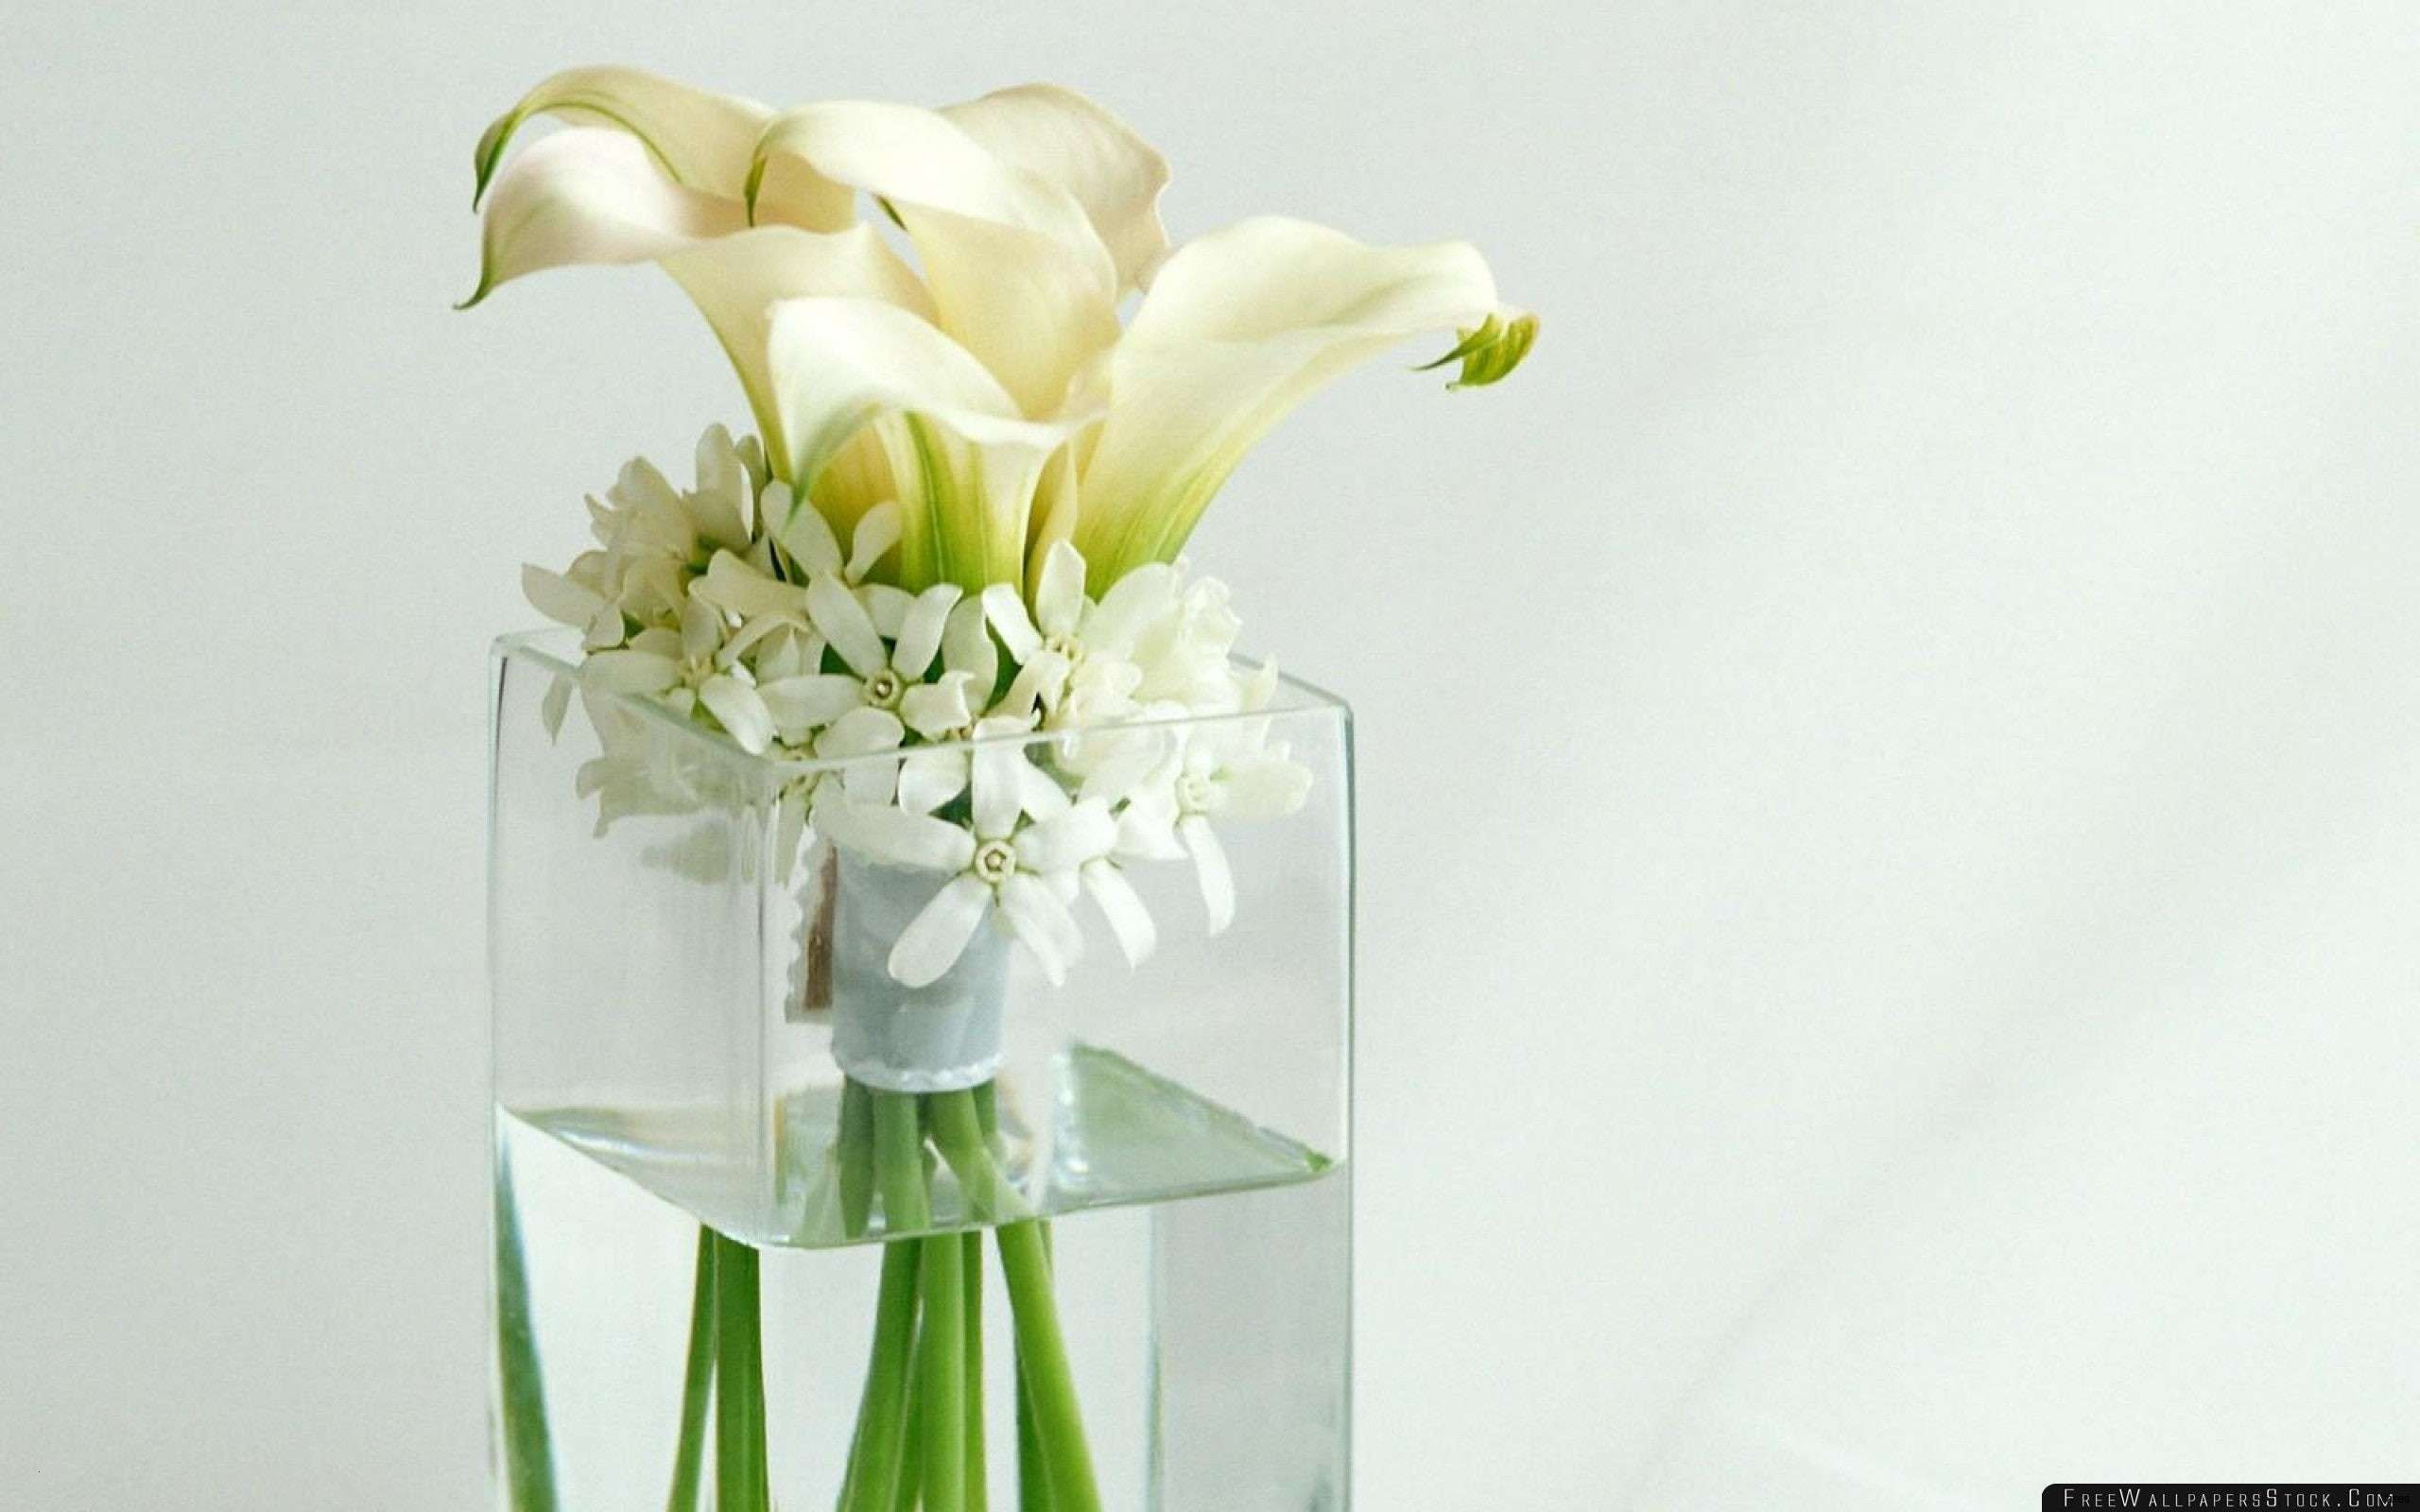 5 clear glass square vases of tall square vases awesome wedding decorations centerpieces unique pertaining to tall square vases awesome wedding decorations centerpieces unique tall vase centerpiece ideas